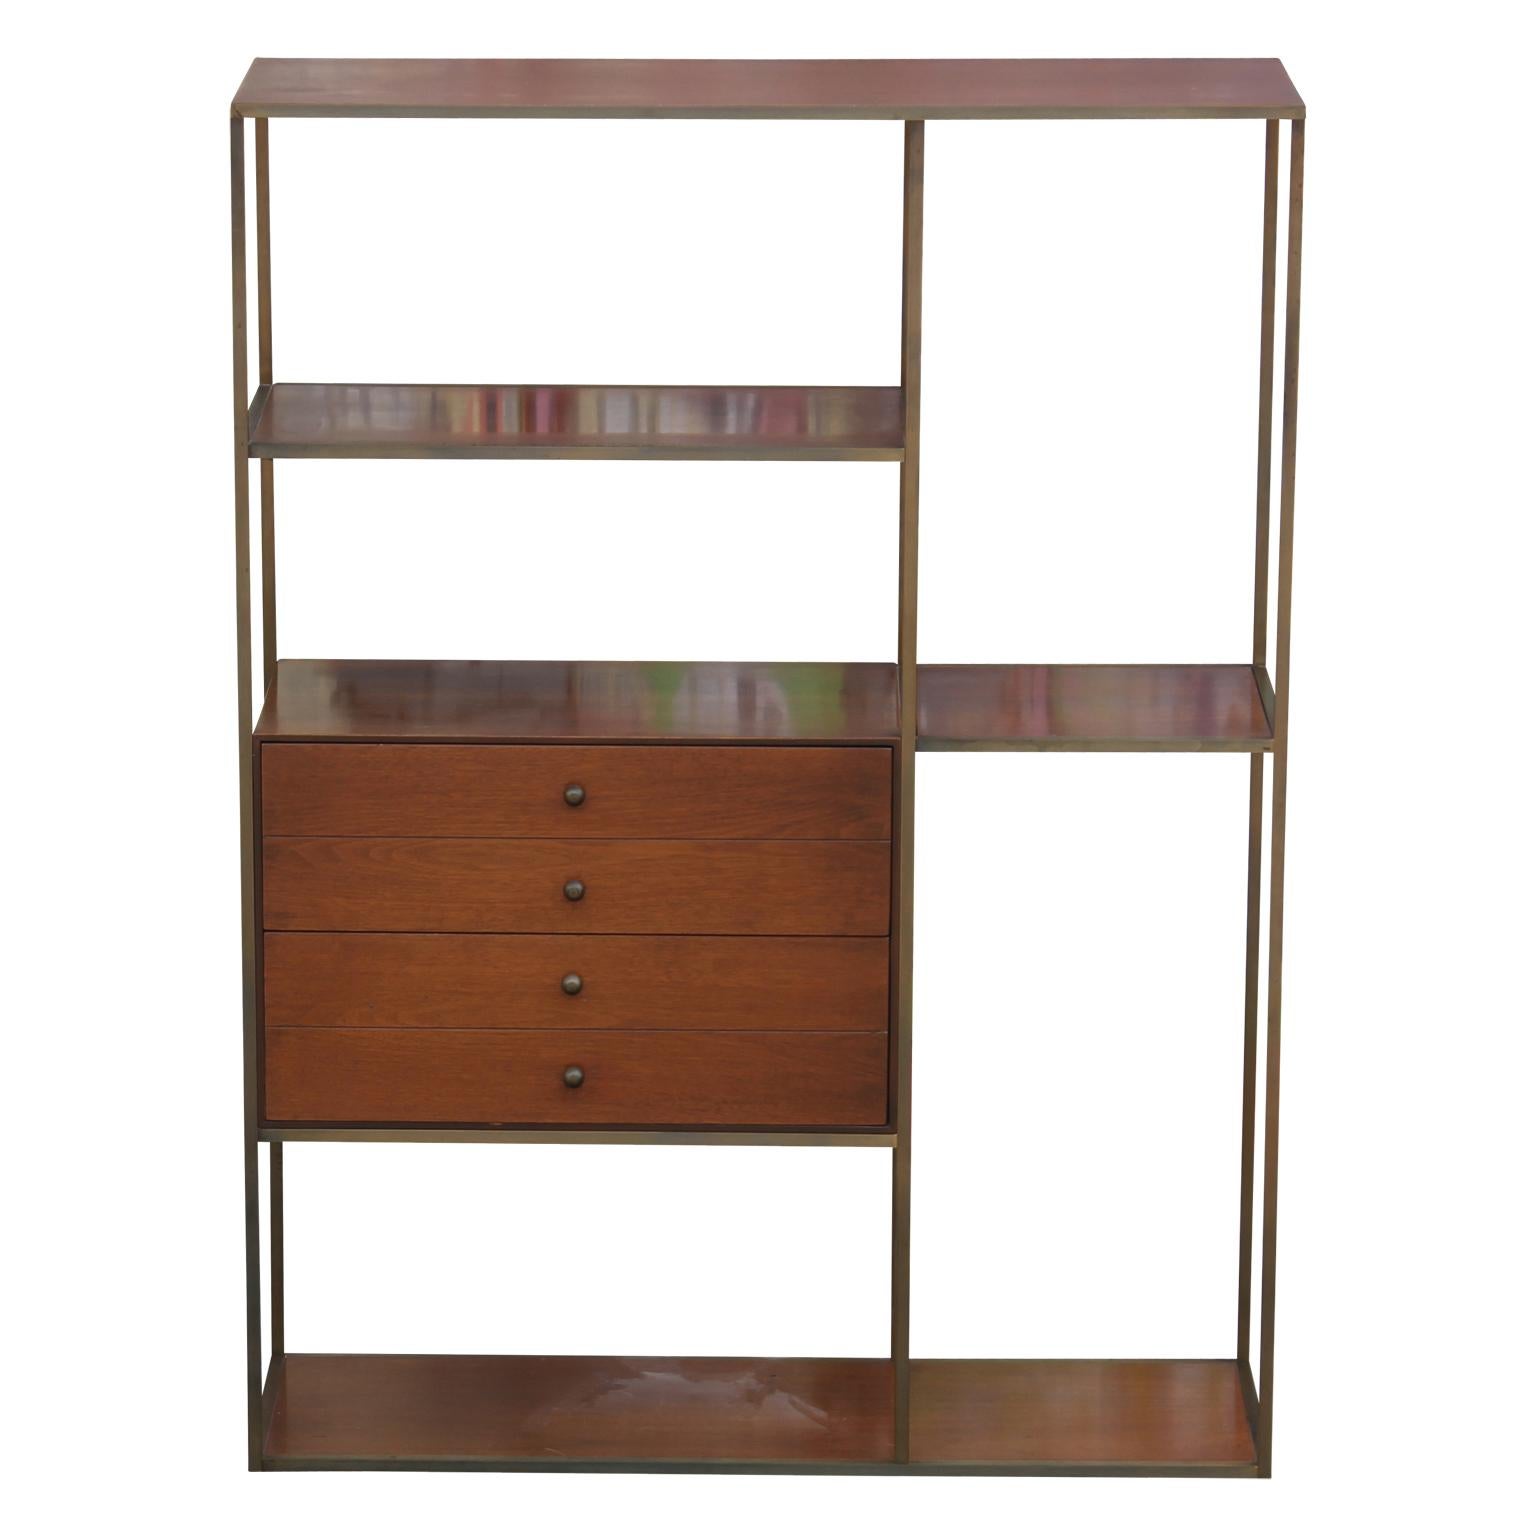 This elegant planner group bookcase is designed by Paul Mccobb and is made from a combination of brass and walnut materials. It has multi-level shelves and a set of drawers on the front. Can also be used as a room divider.